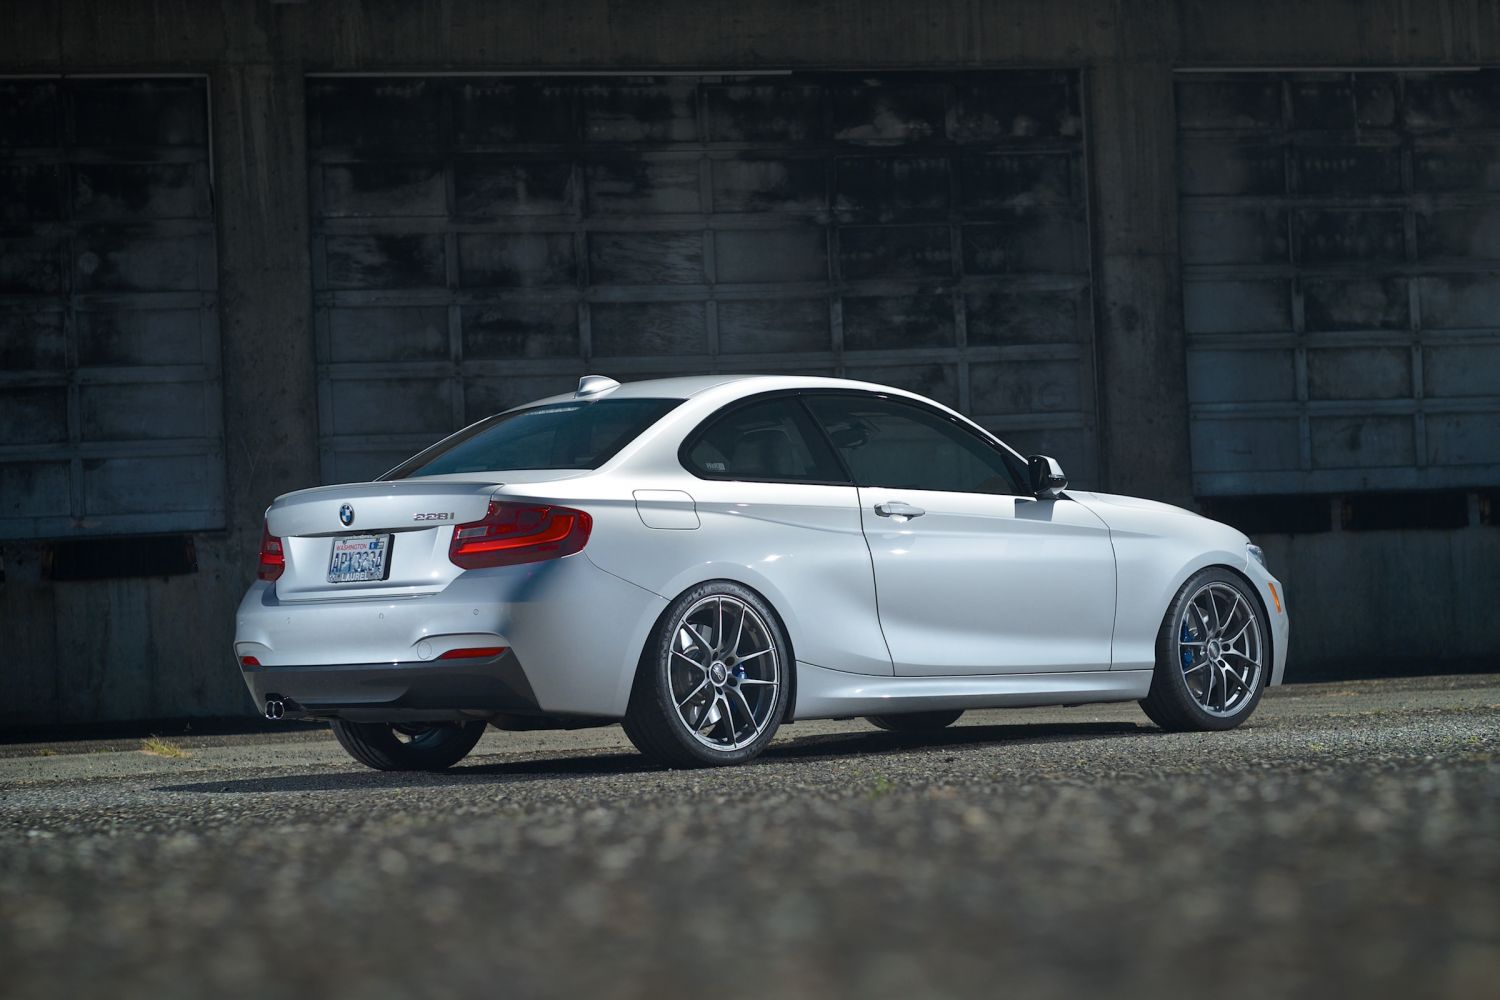 H&R 2014 BMW 228i M Sport Coupe | H&R Special Springs, LP.
